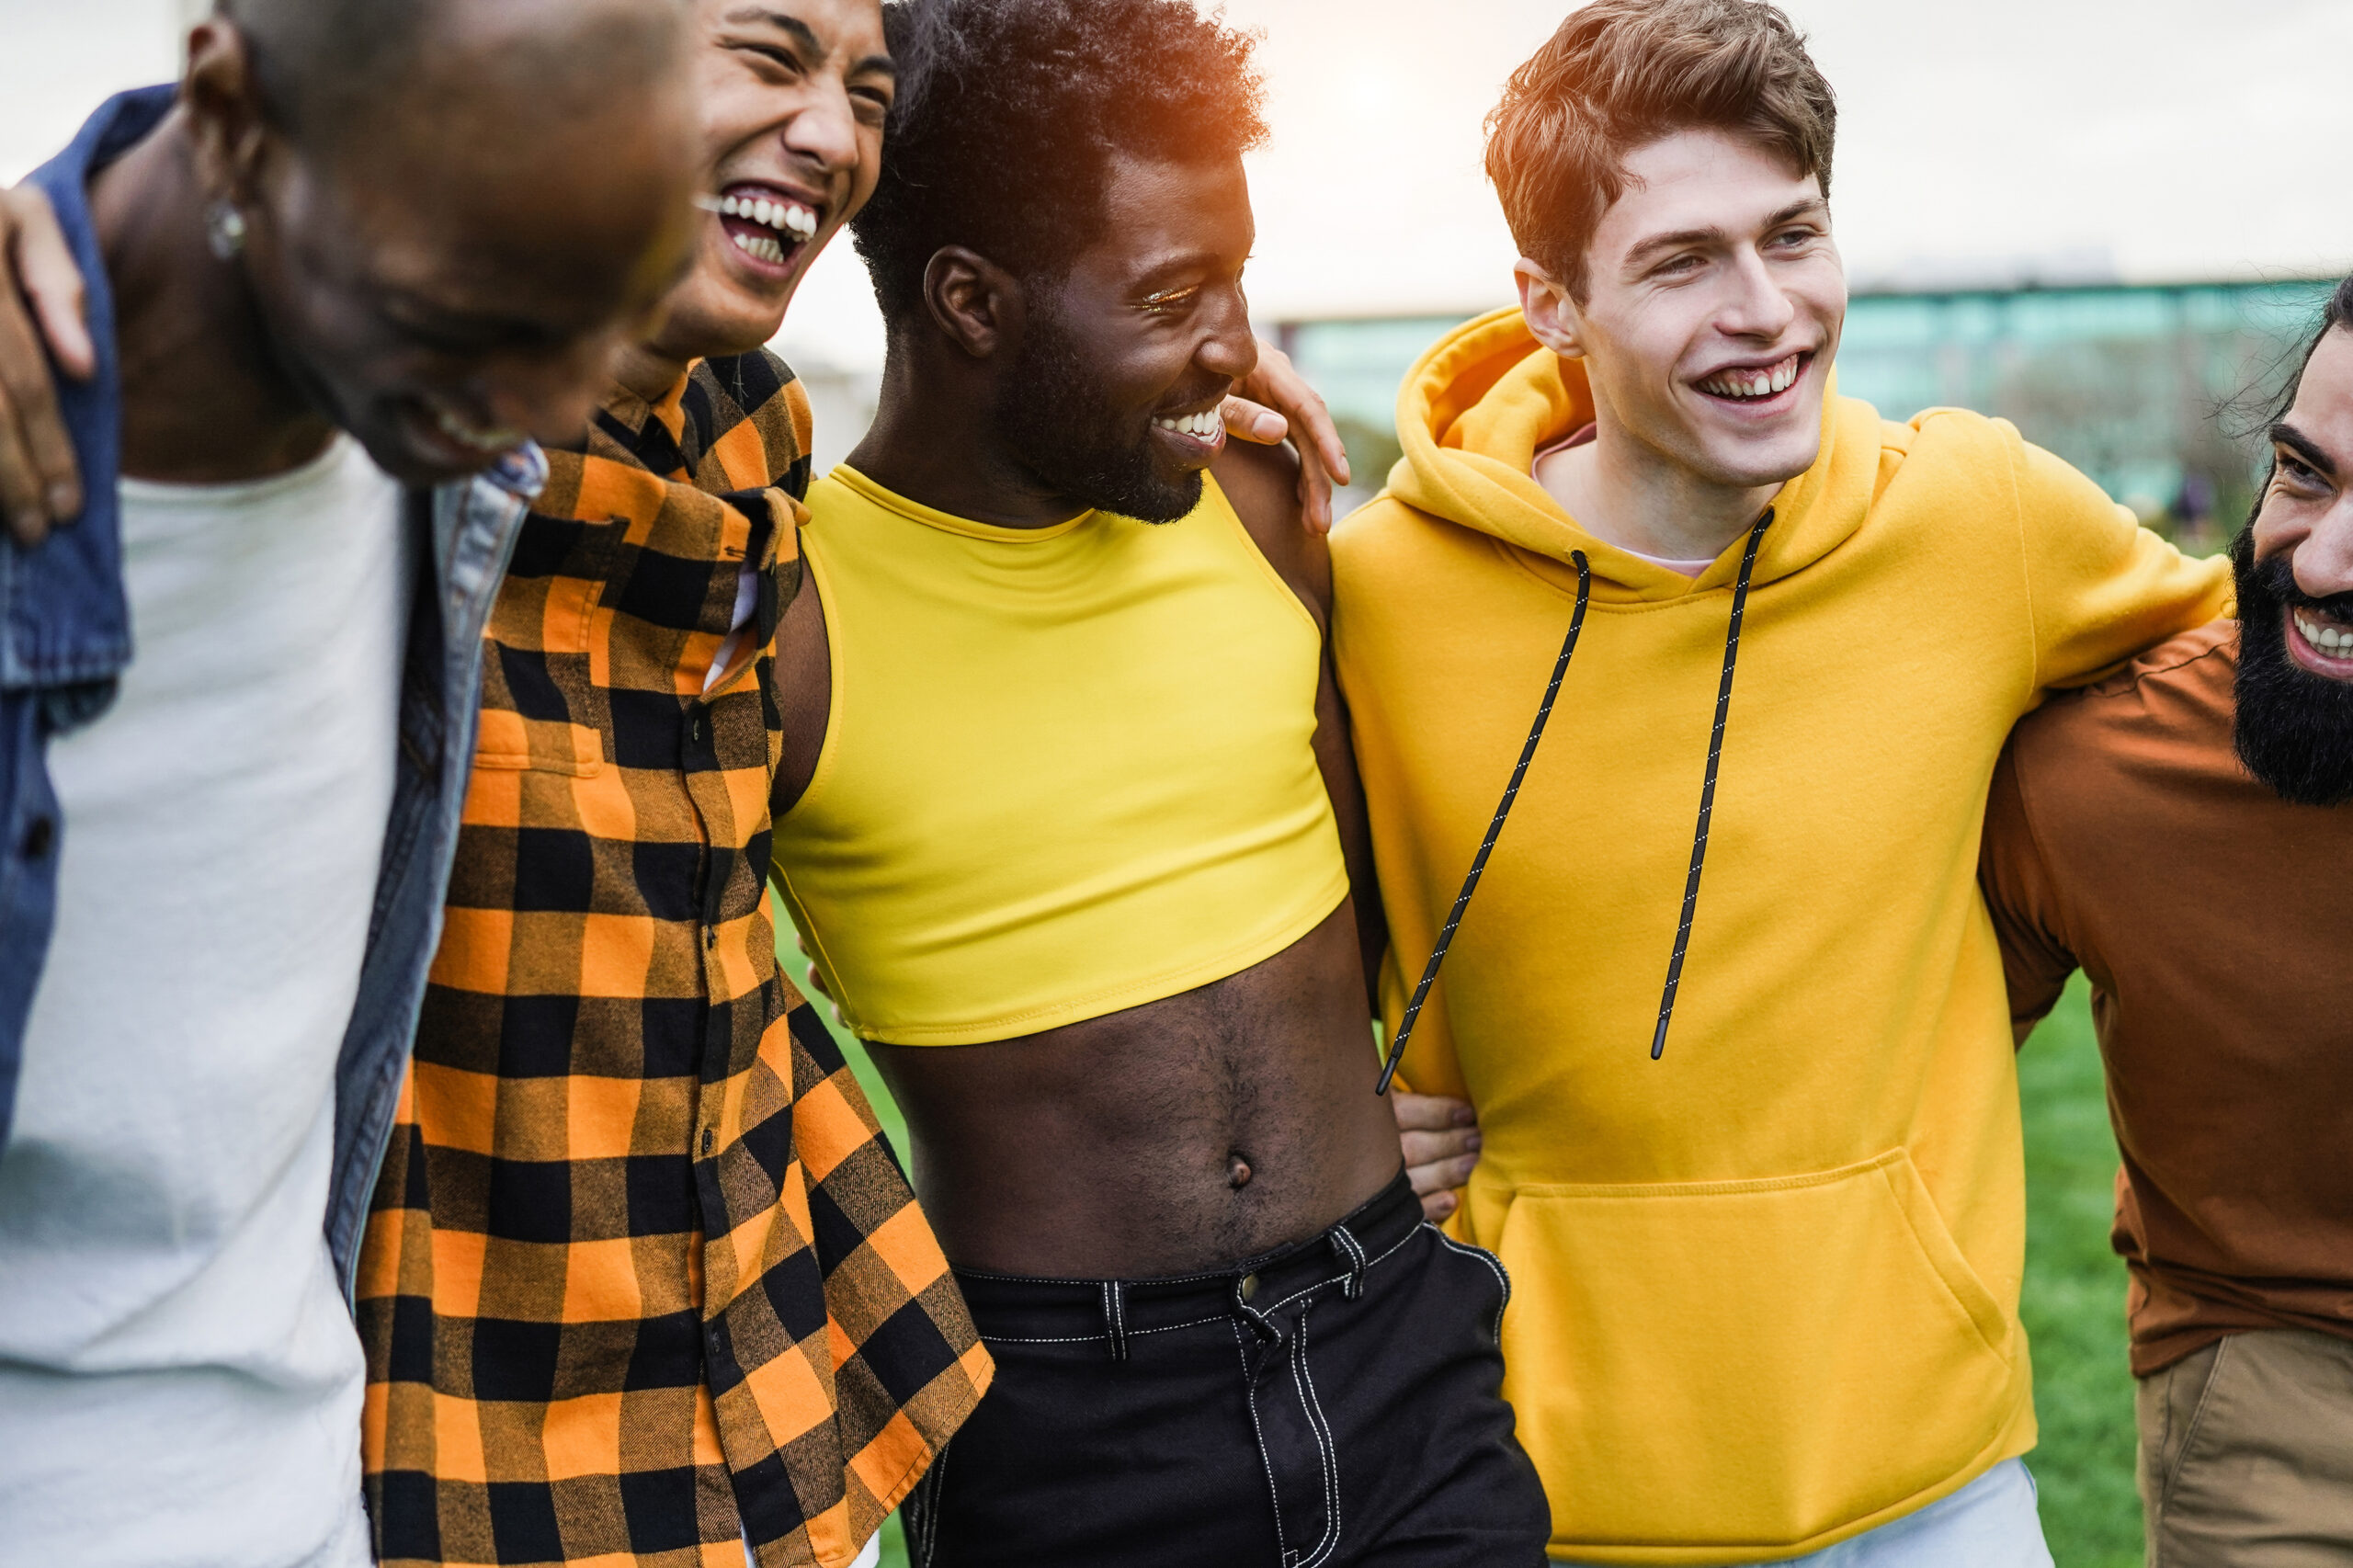 Young diverse men hugging each other at city park - Focus on guy face wearing yellow sweater